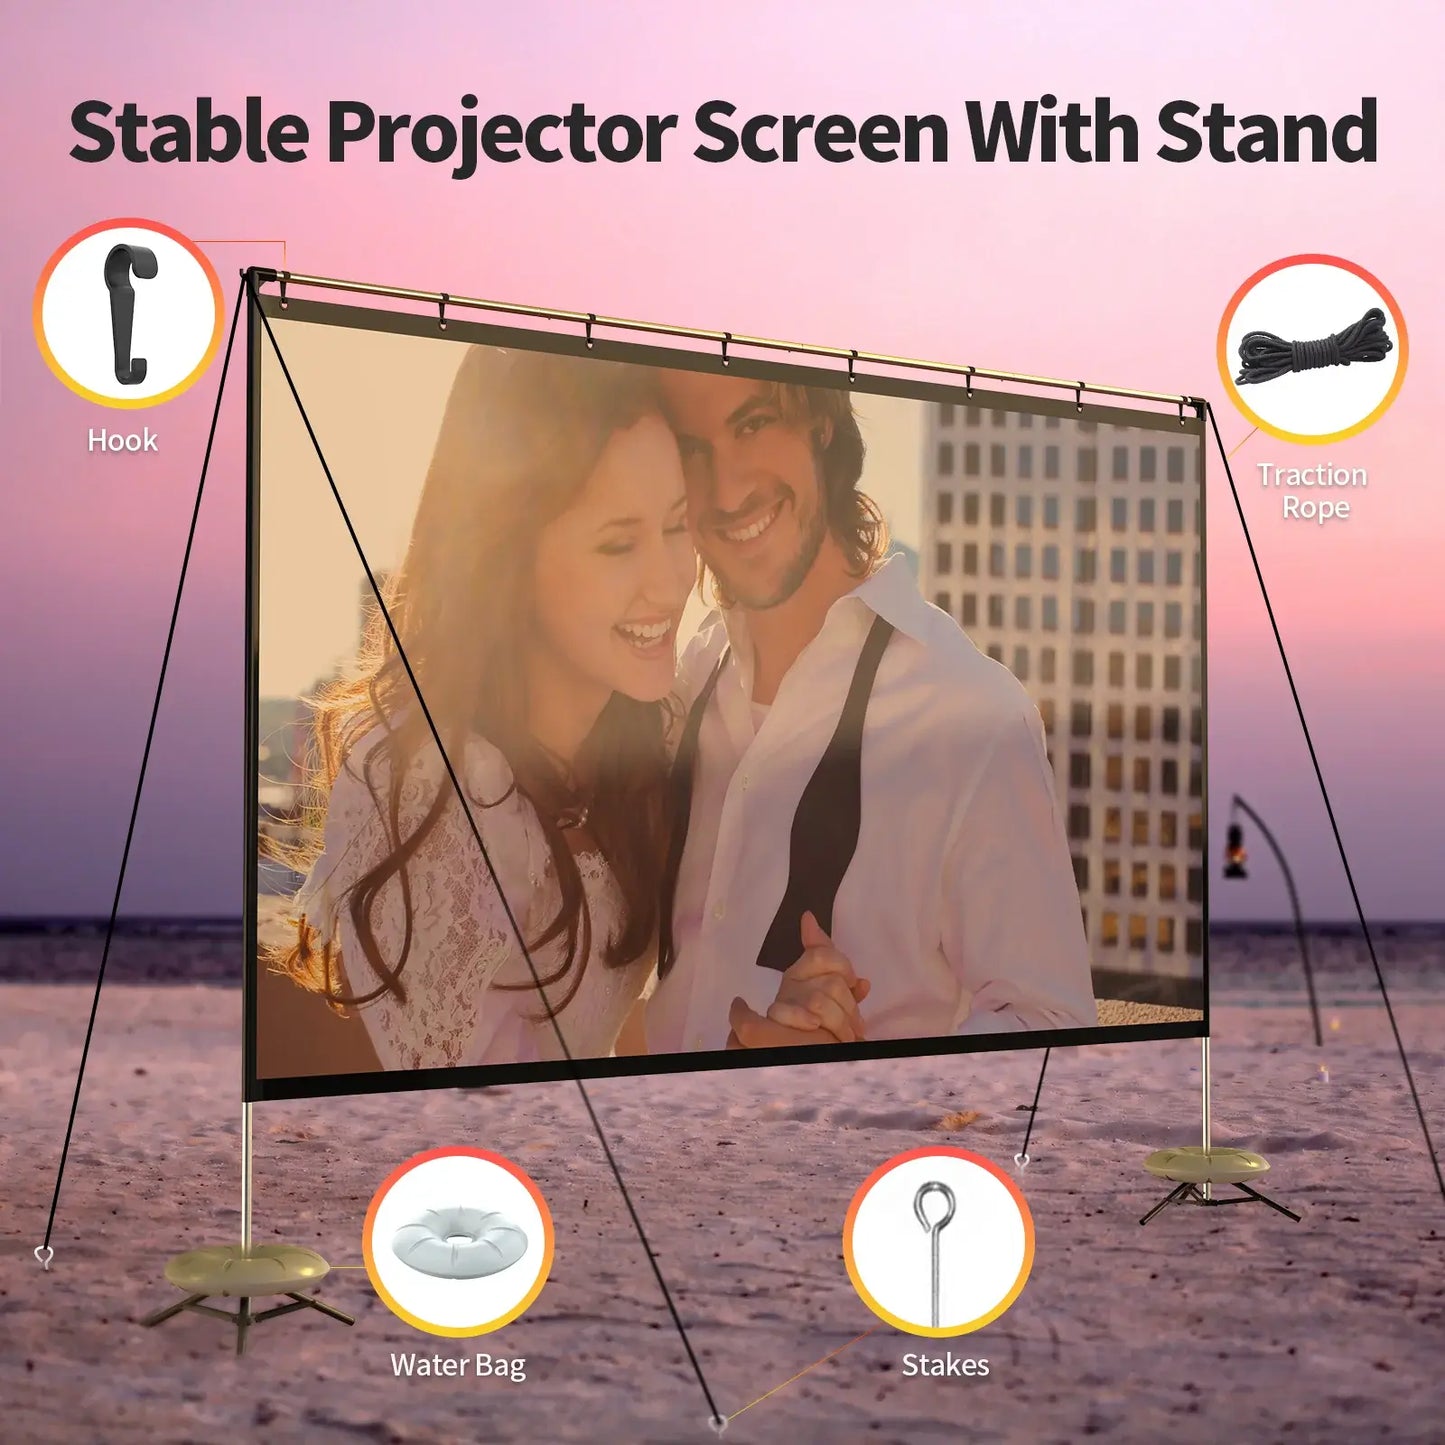 WEWATCH PS01 100" Projector Screen with Stand: 4K, Lightweight, 16:9